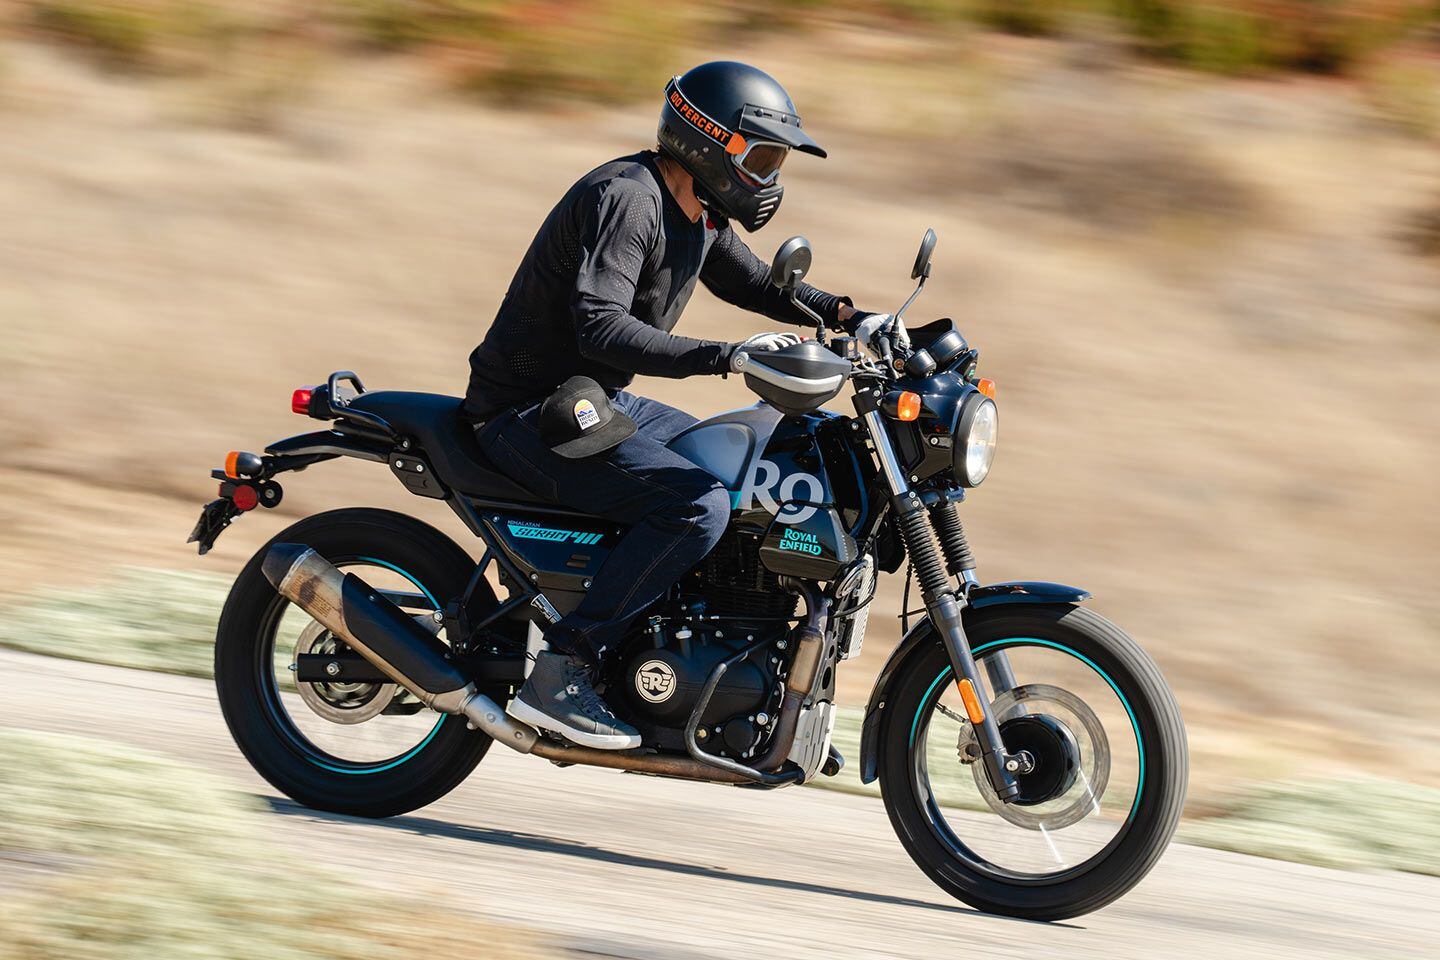 The Enfield’s 411 engine makes the majority of its torque from just above idle (upward of 20 lb.-ft.) which makes it an easy bike to ride for beginners and first-timers.